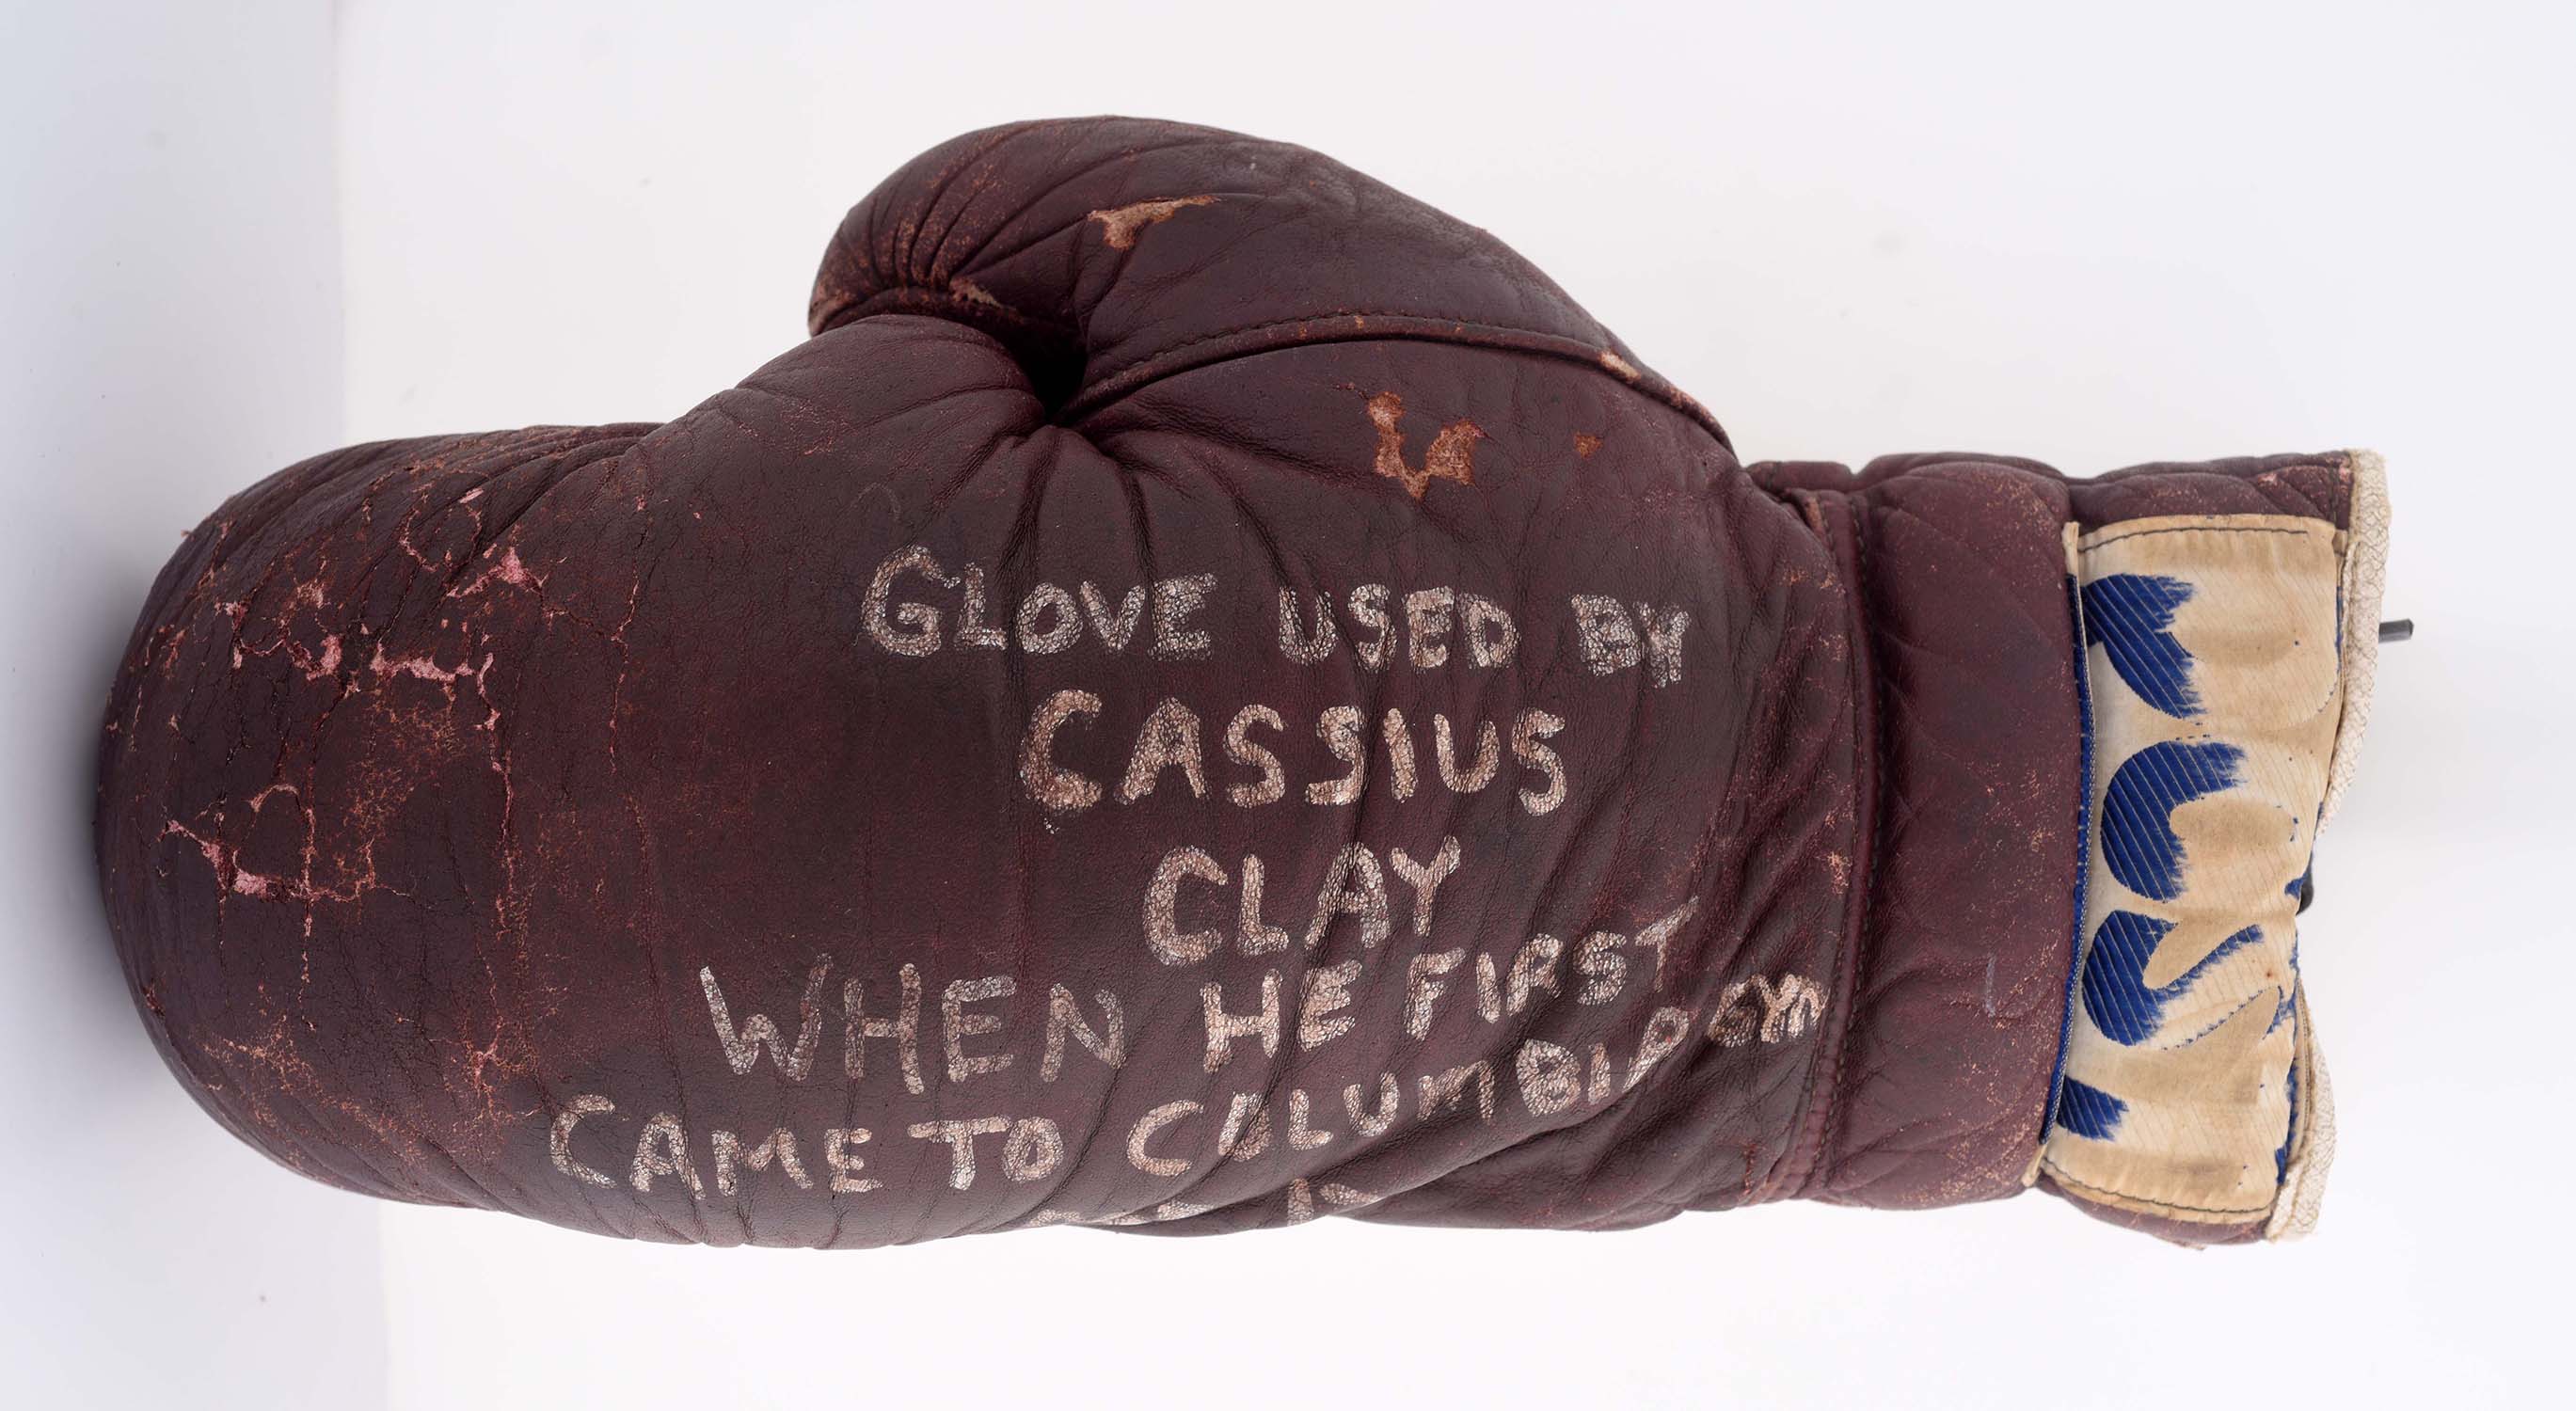 1954 Cassius Clay Earliest Known Boxing Glove, estimated at $10,000-20,000.